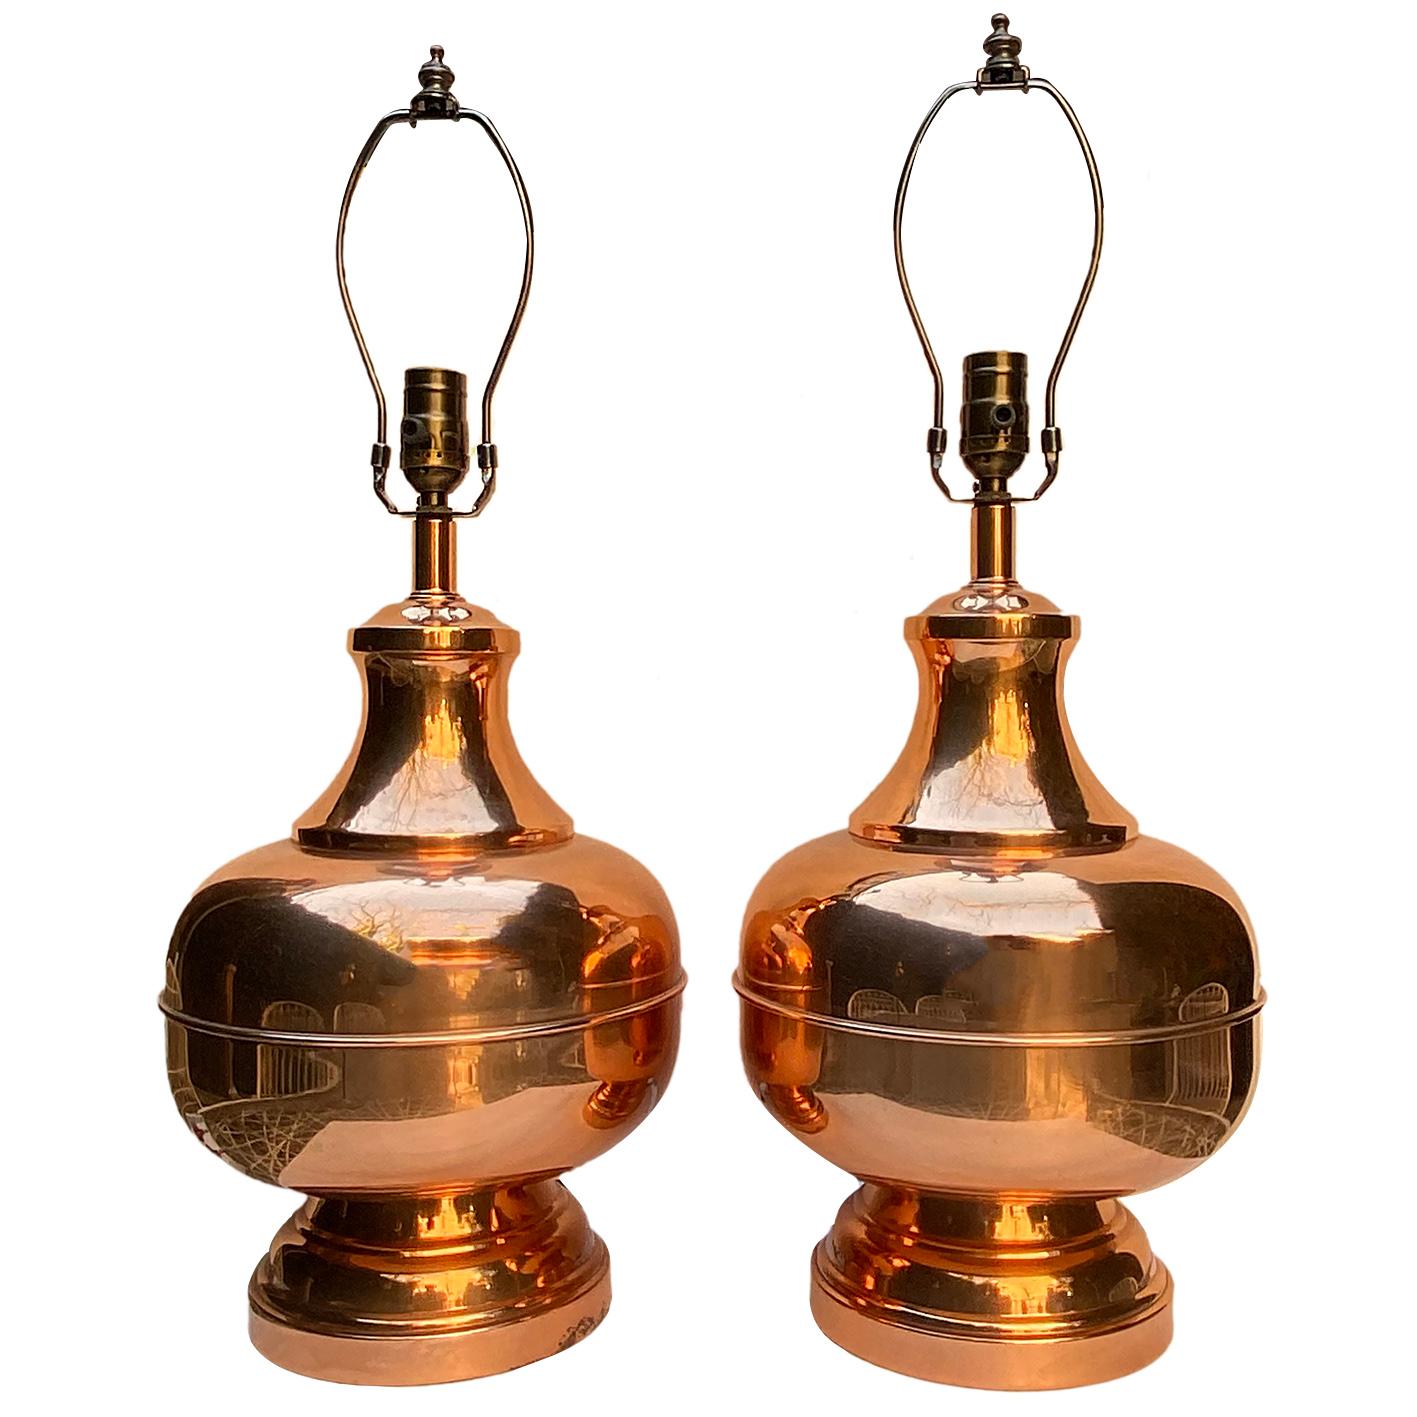 Pair of circa 1960's English copper table lamps with polished finish.

Measurements:
Height of body: 14